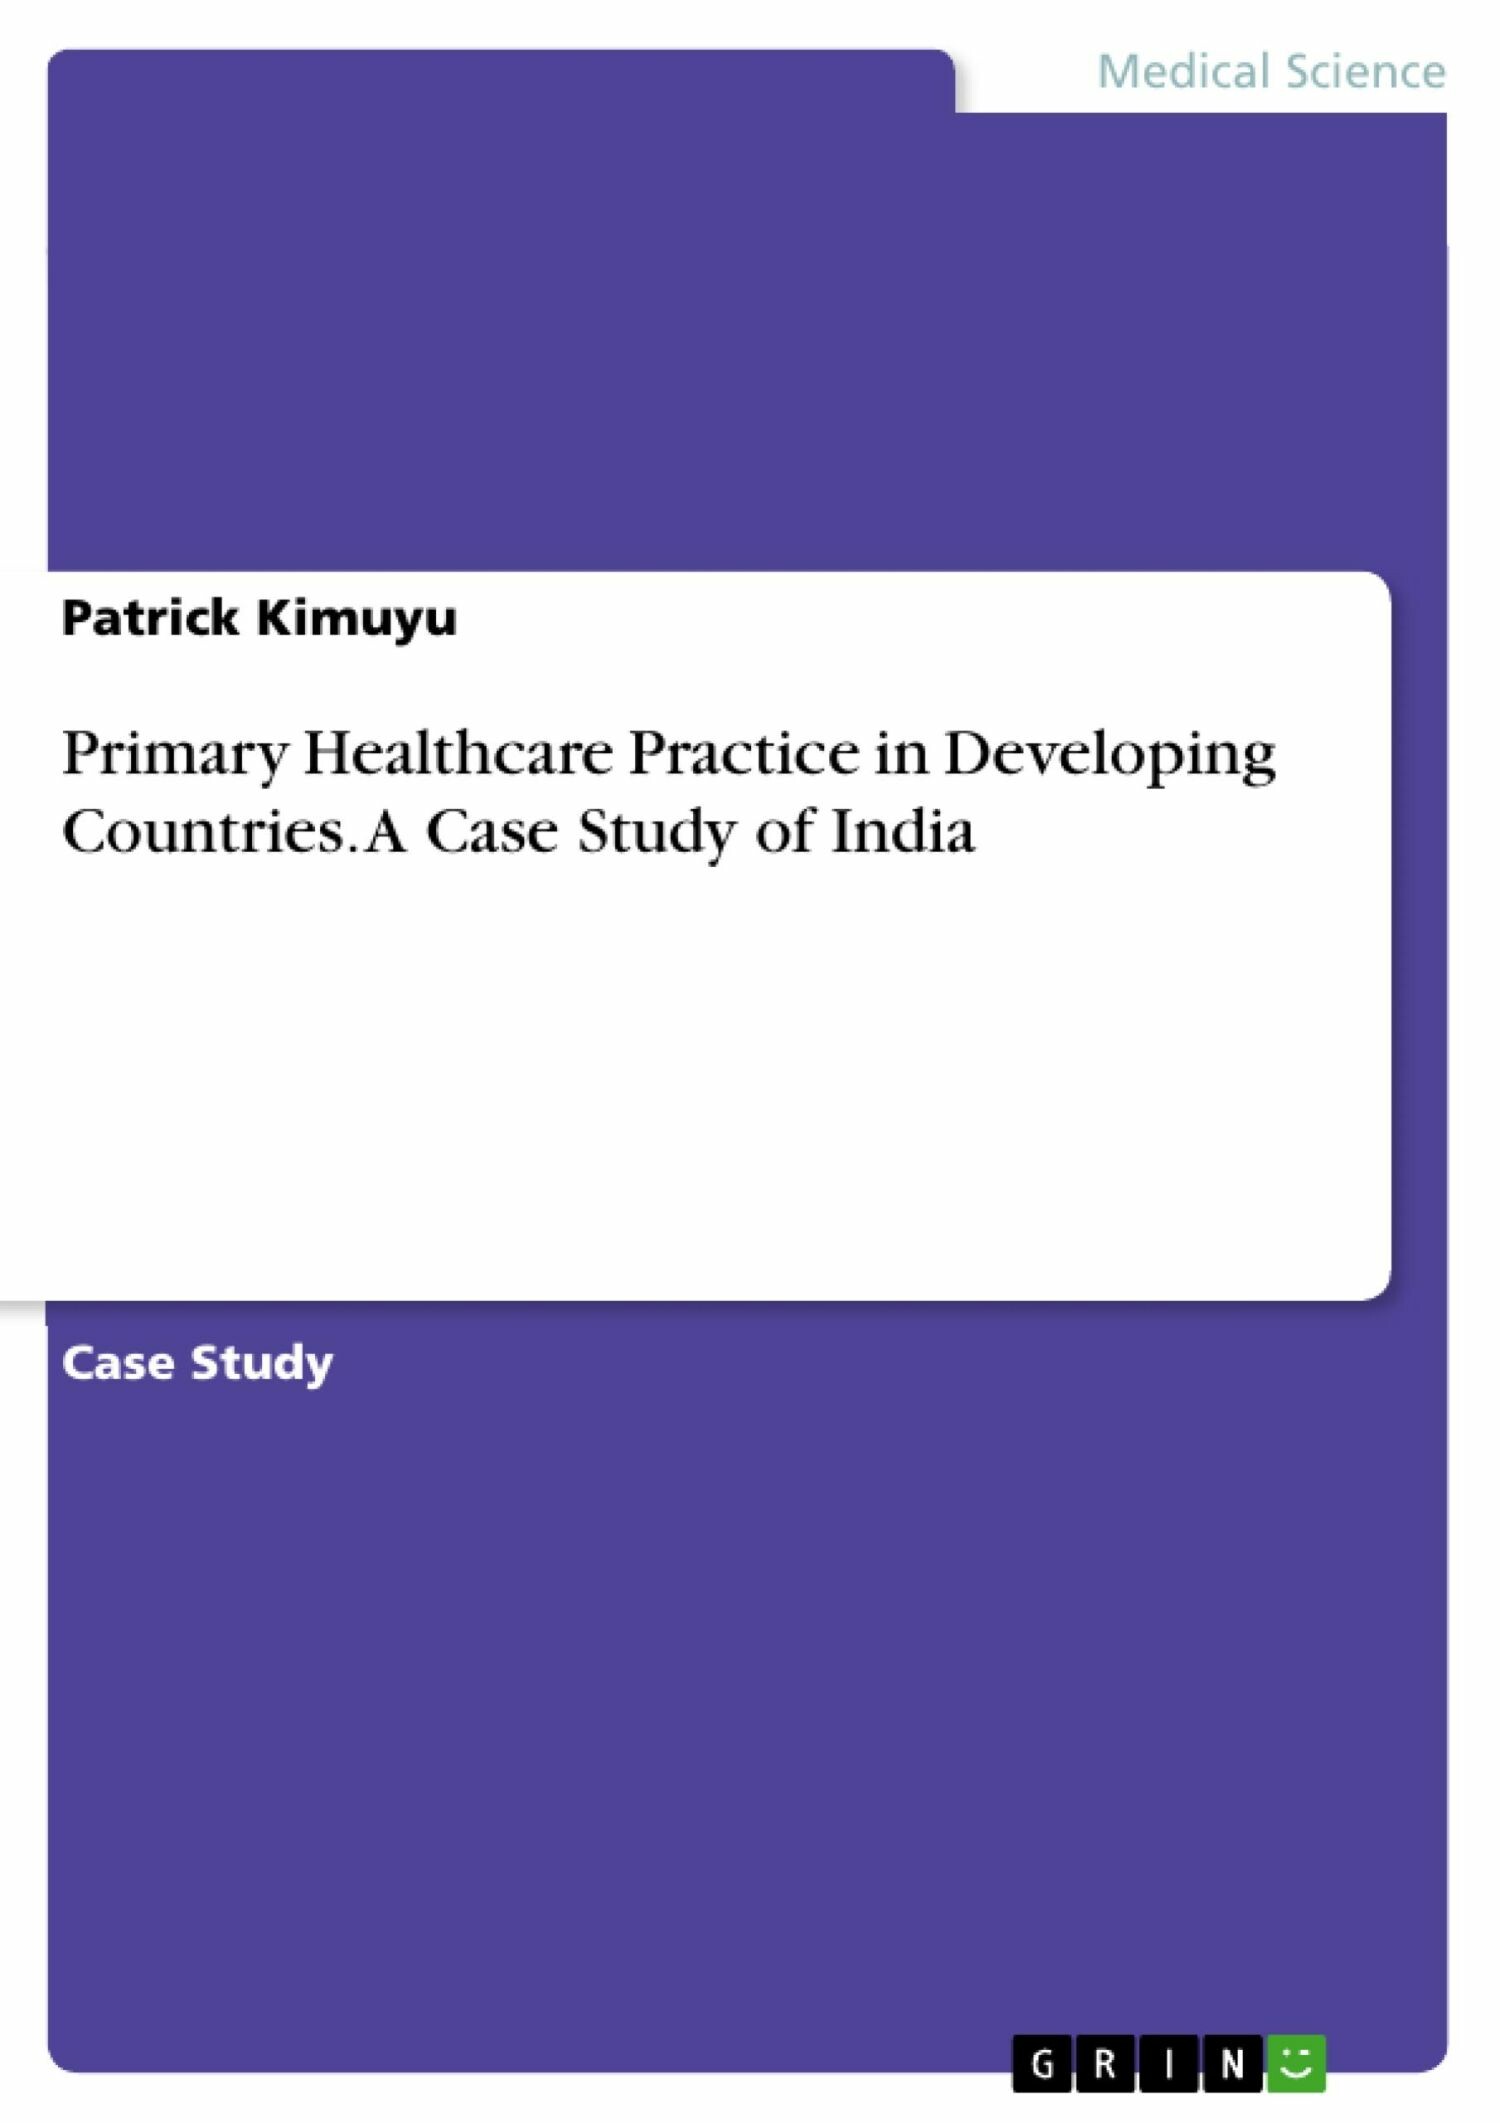 Primary Healthcare Practice in Developing Countries. A Case Study of India